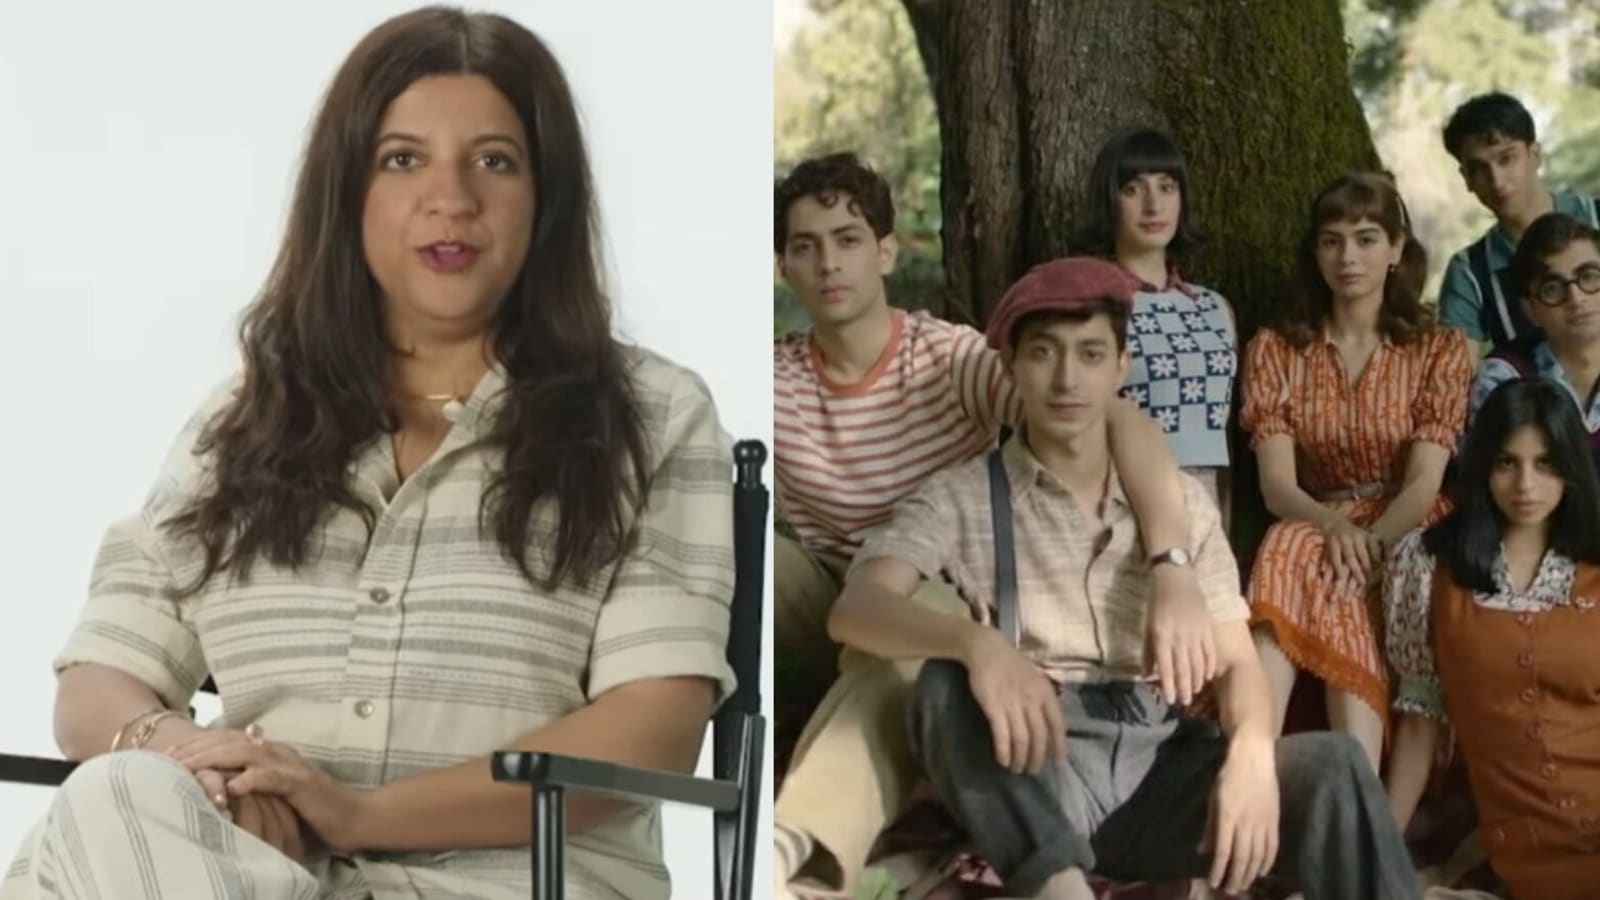 Zoya Akhtar says ‘The Archies is based on Anglo-Indian community’ after facing flak for being ‘unrelatable’